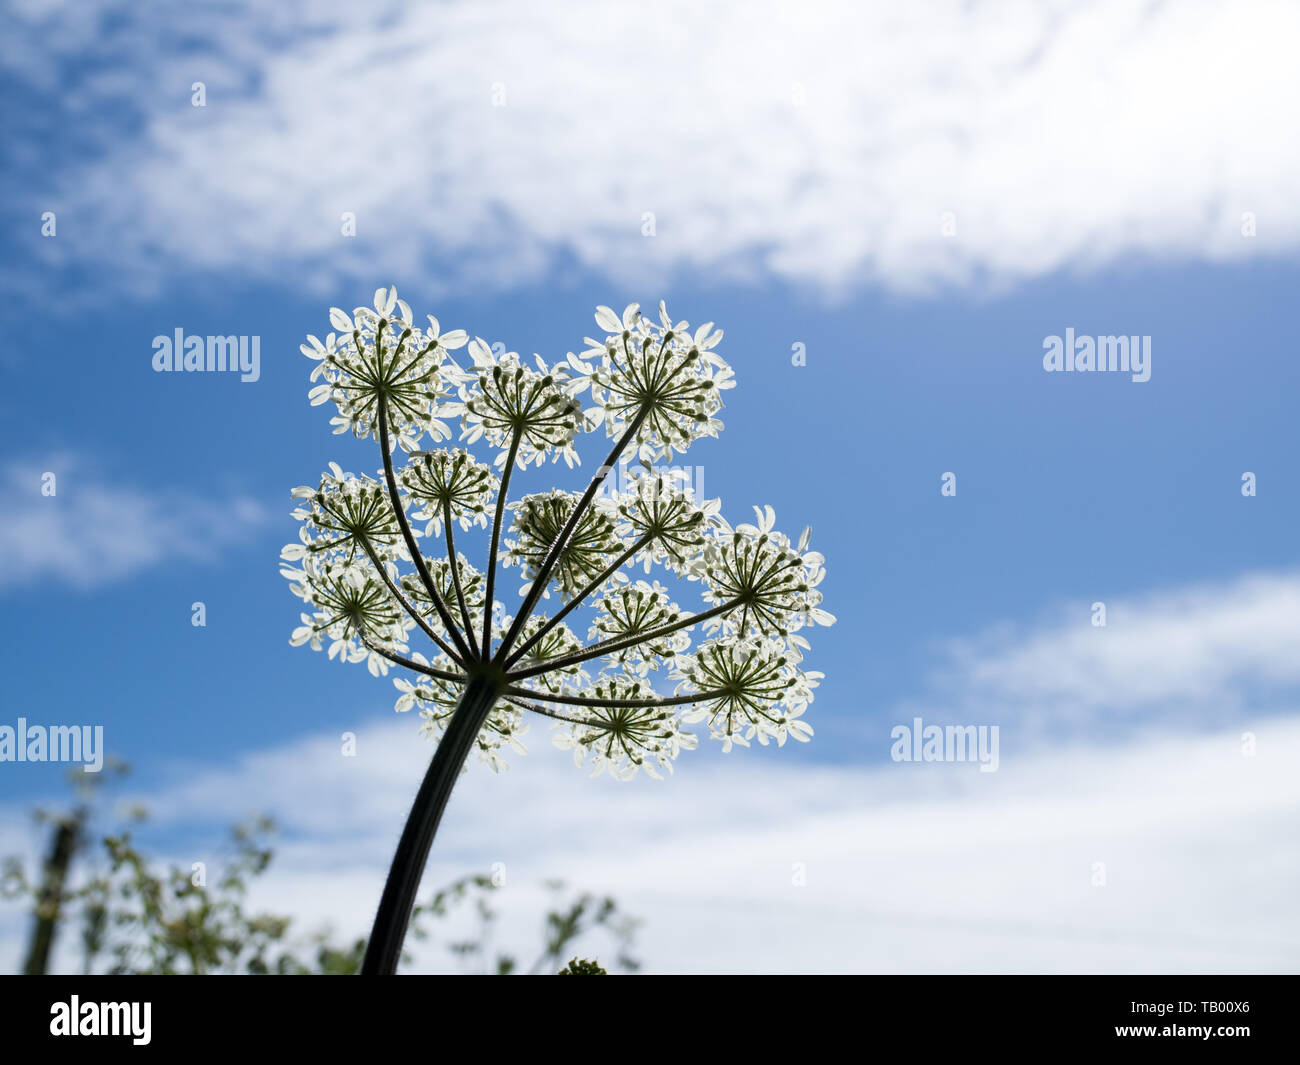 a close up view of a single isolated Queen Anne's lace from below againt a blue sky with cloud Stock Photo